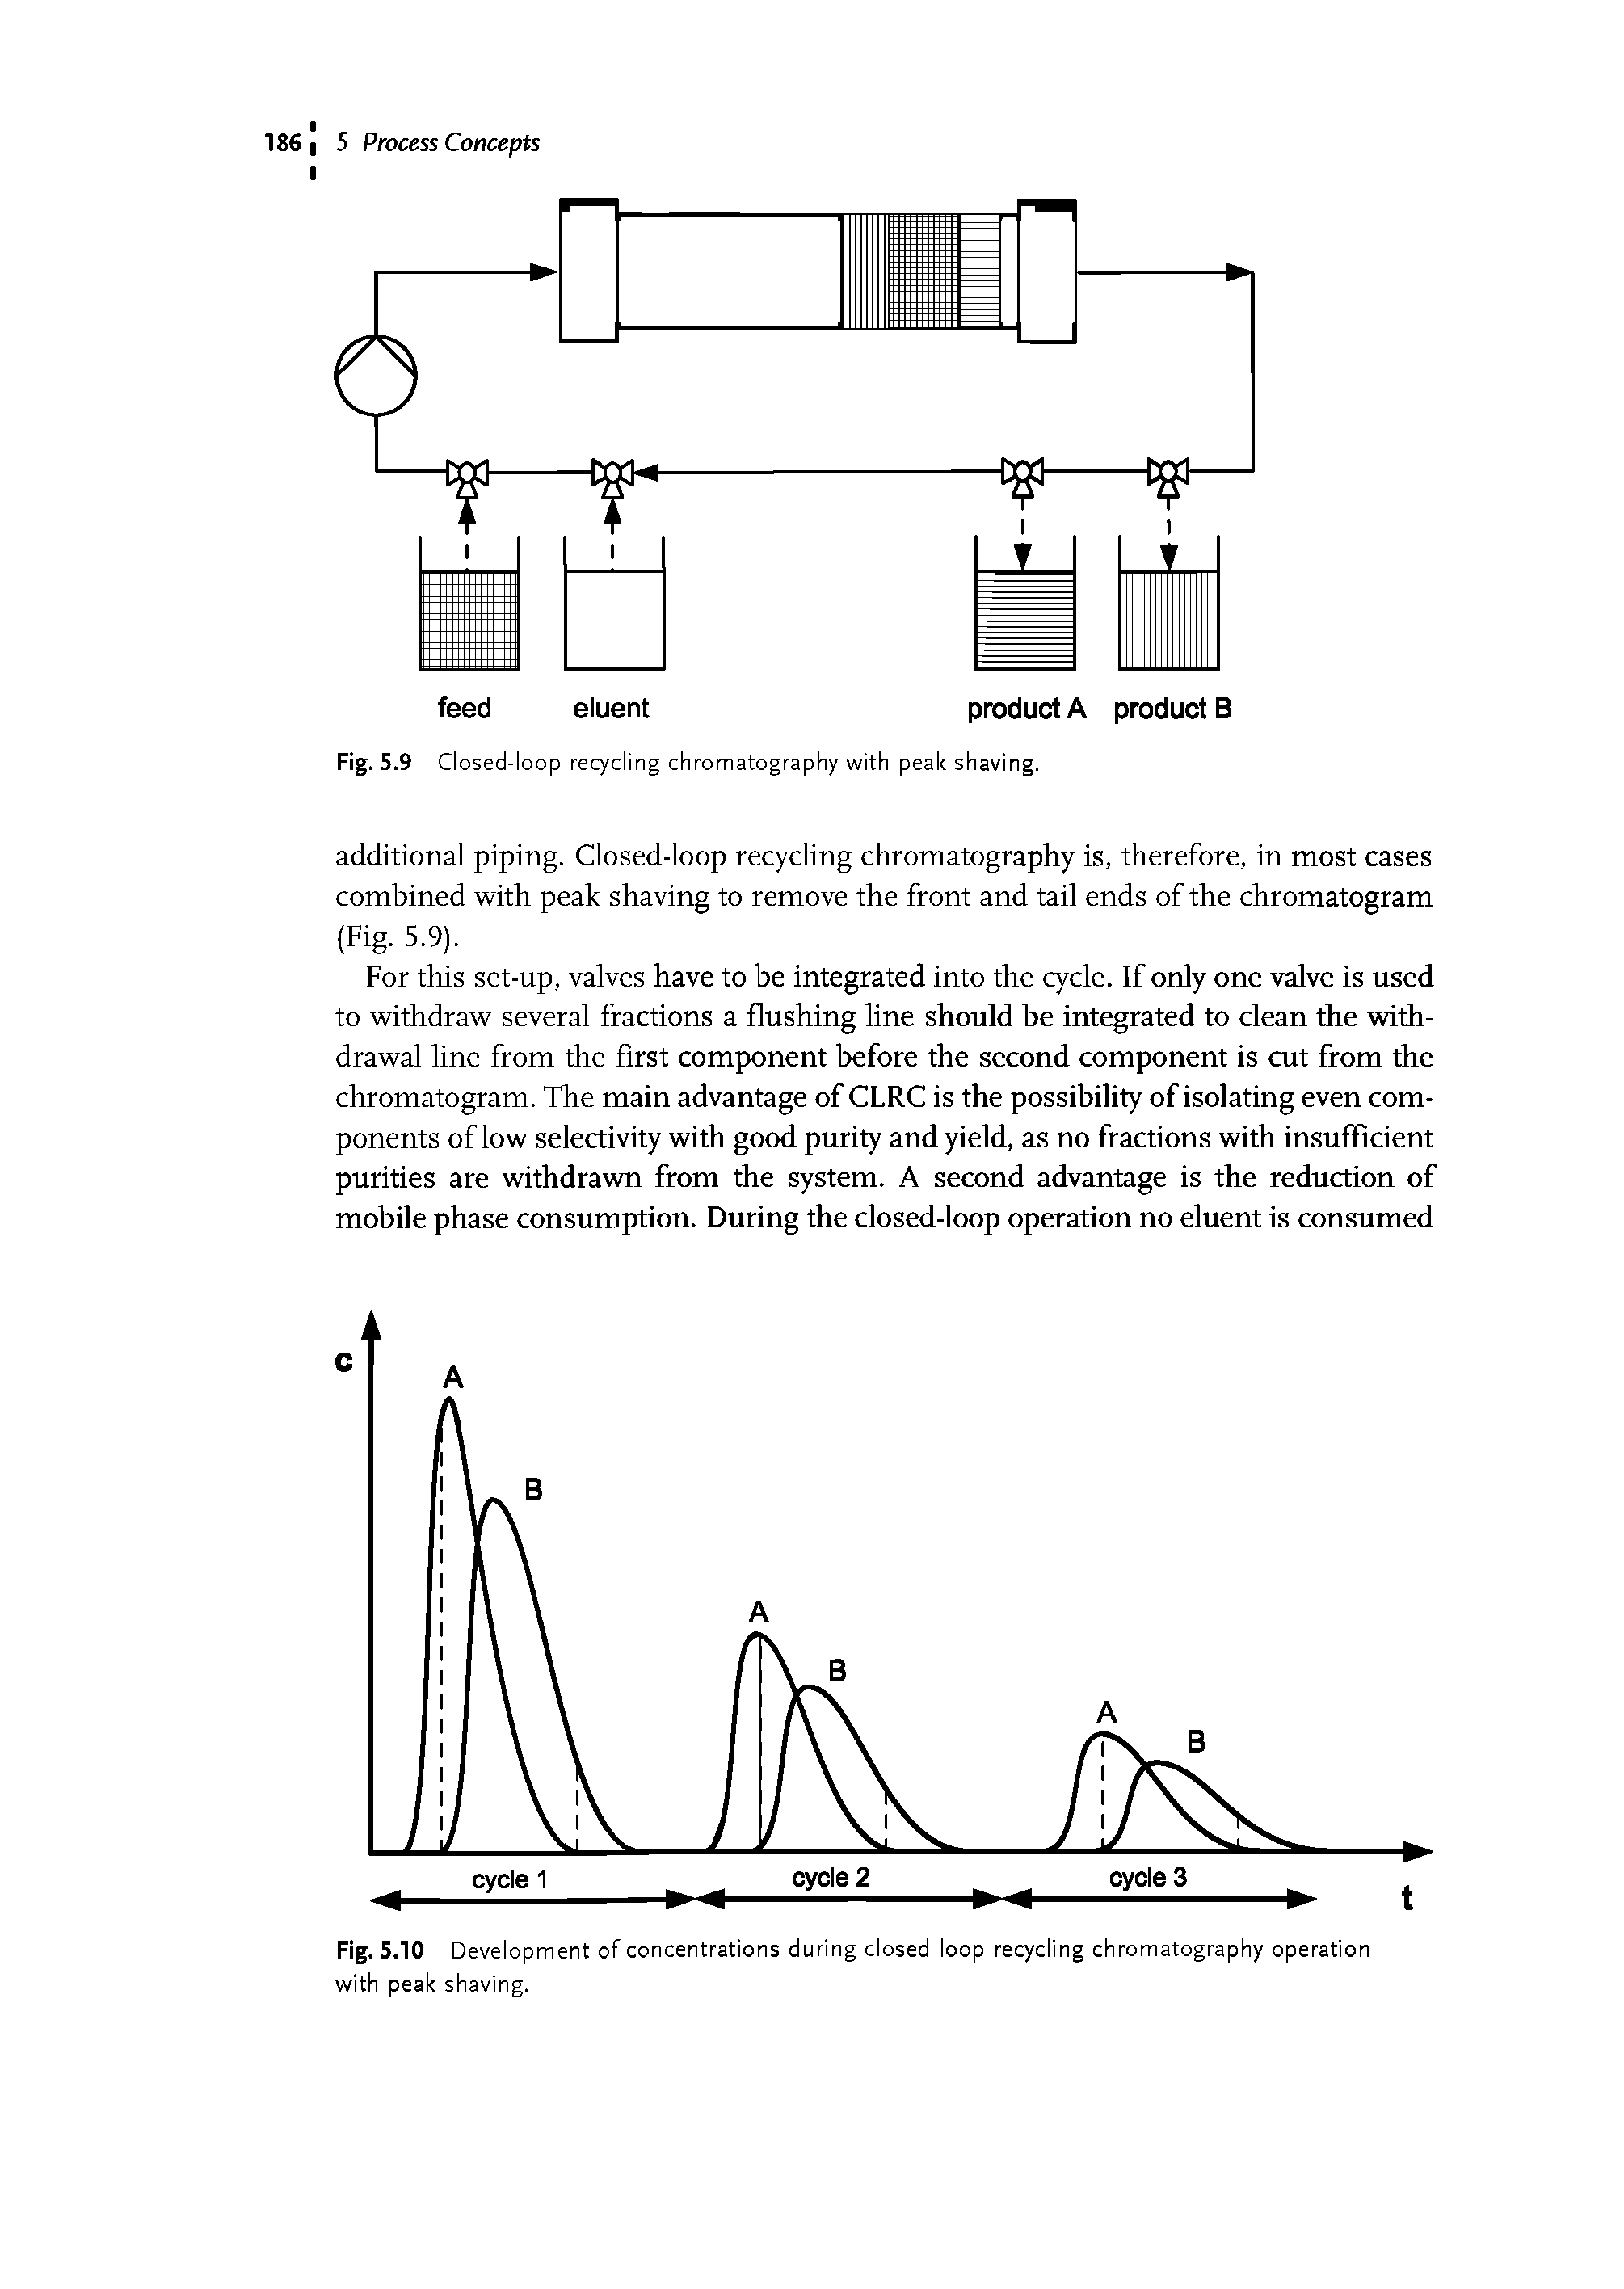 Fig. 5.10 Development of concentrations during closed loop recycling chromatography operation with peak shaving.